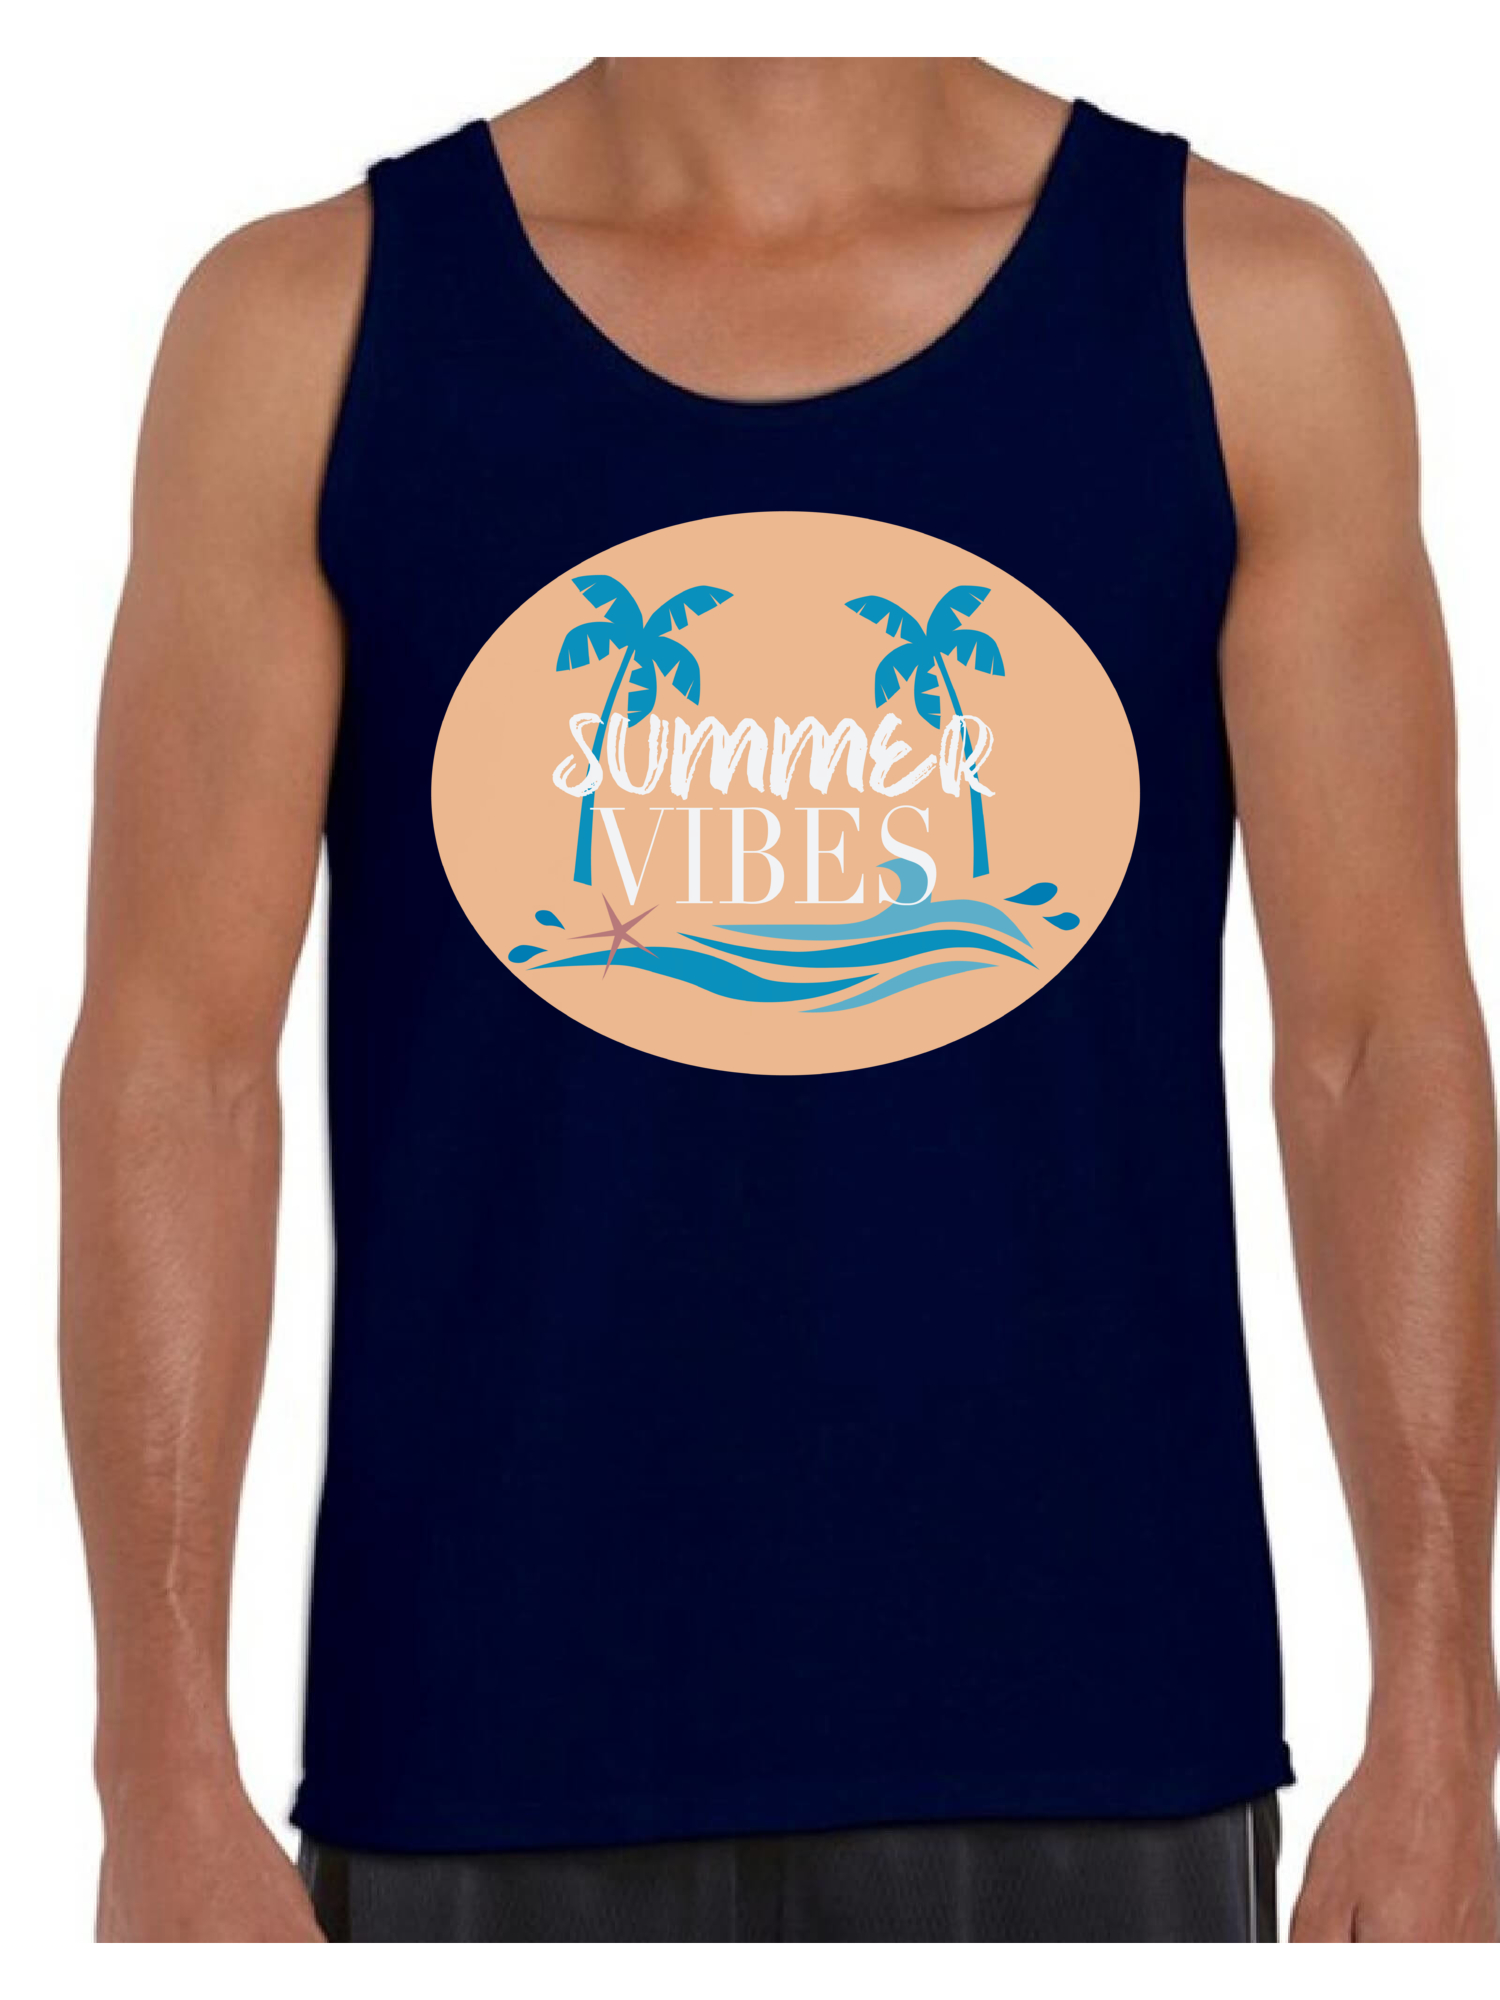 Awkward Styles Palms Shirt Vacay Vibes Clothing Collection for Men Beach Tank Top for Men Vacay Vibes Shirts Summer Vibes Clothes for Men Summer Tank Top Beach Tshirt for Men Beach Gifts - image 1 of 4